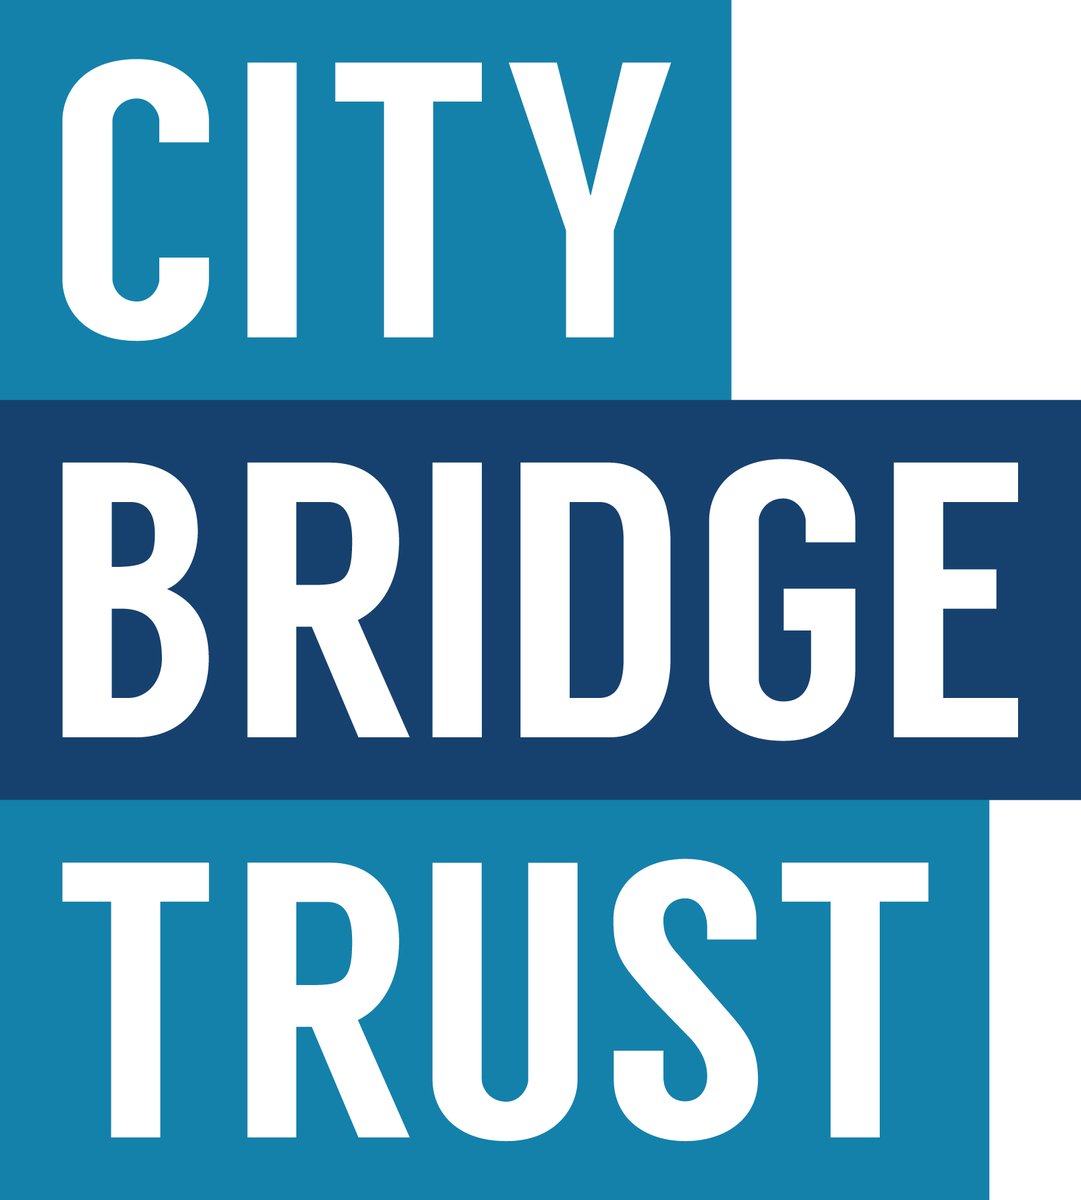 We are thrilled to announce that we received the @CityBridgeTrust 
grant. The funds will go towards our Money Coach service to alleviate financial crisis and build #financialresilience through specialist #debt and #moneyadvice. Thank you, @CityBridgeTrust. moneyaande.co.uk/money-coaches